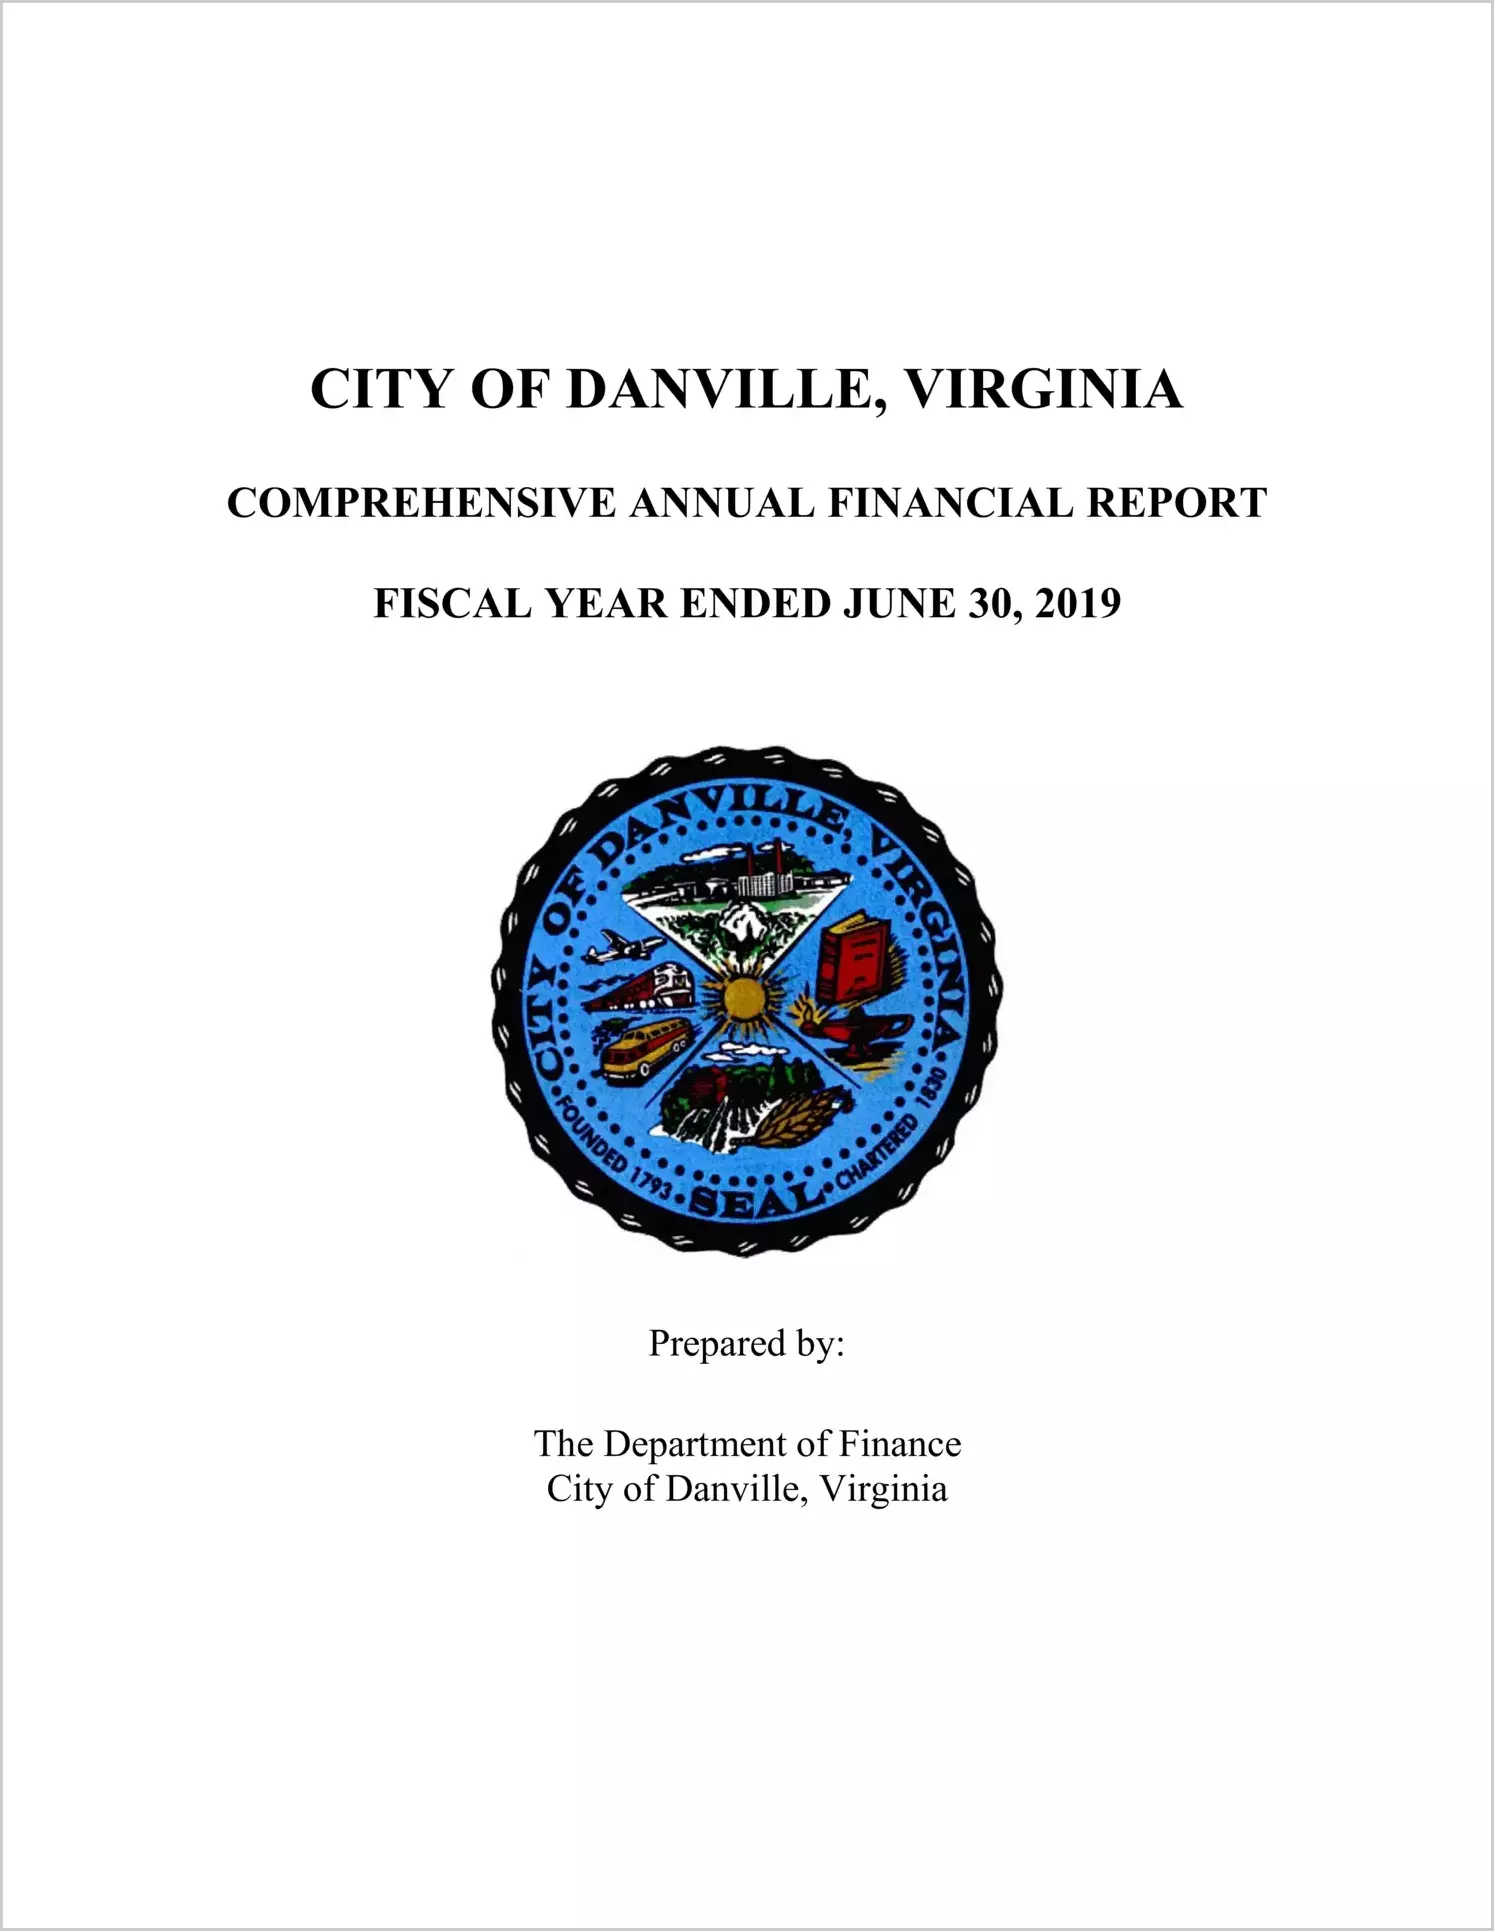 2019 Annual Financial Report for City of Danville